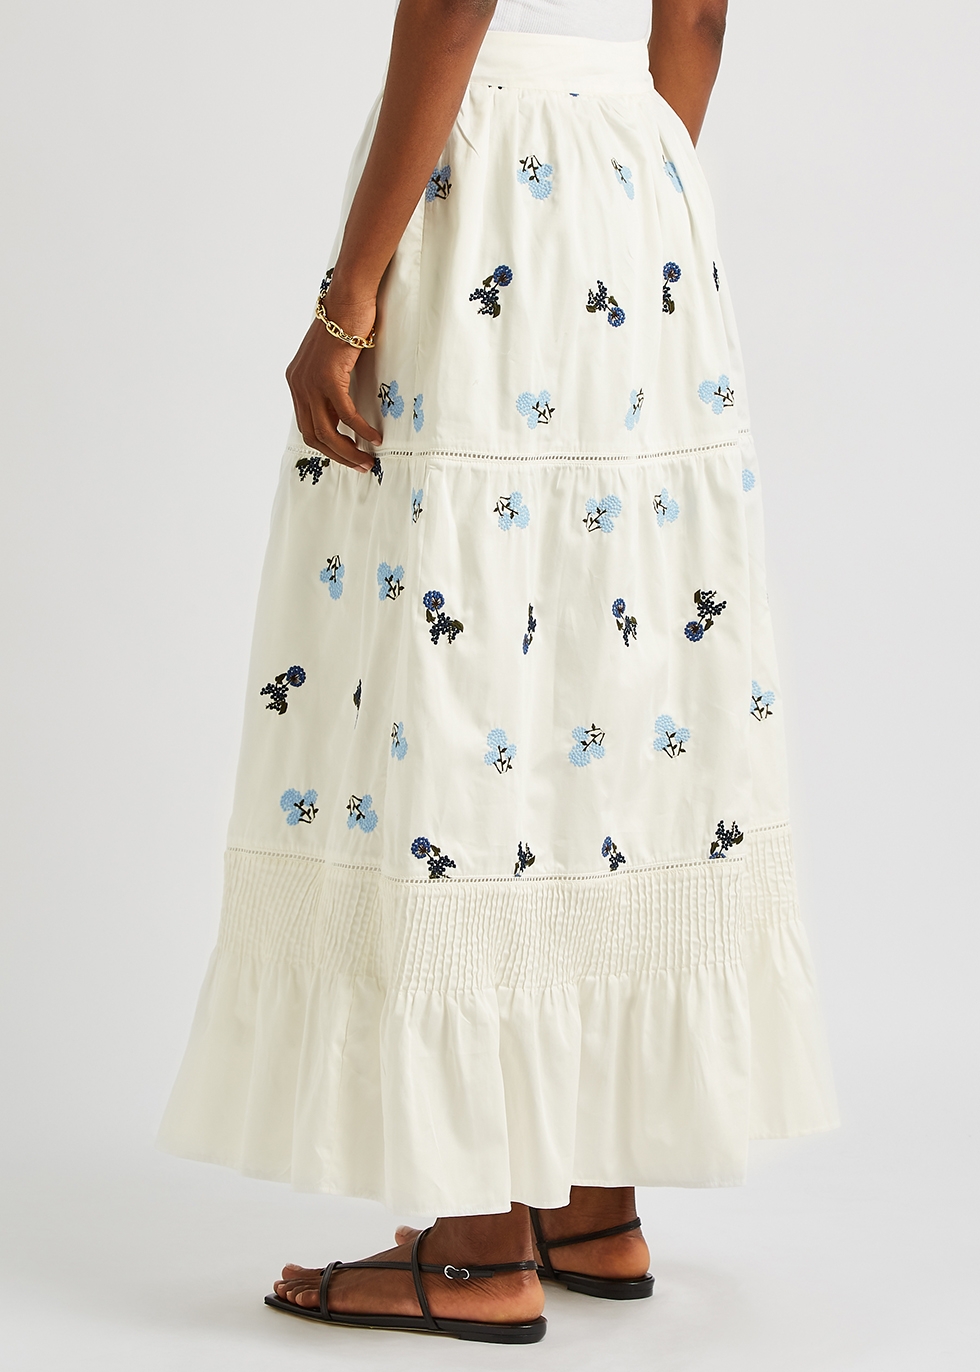 cotton skirt pictures